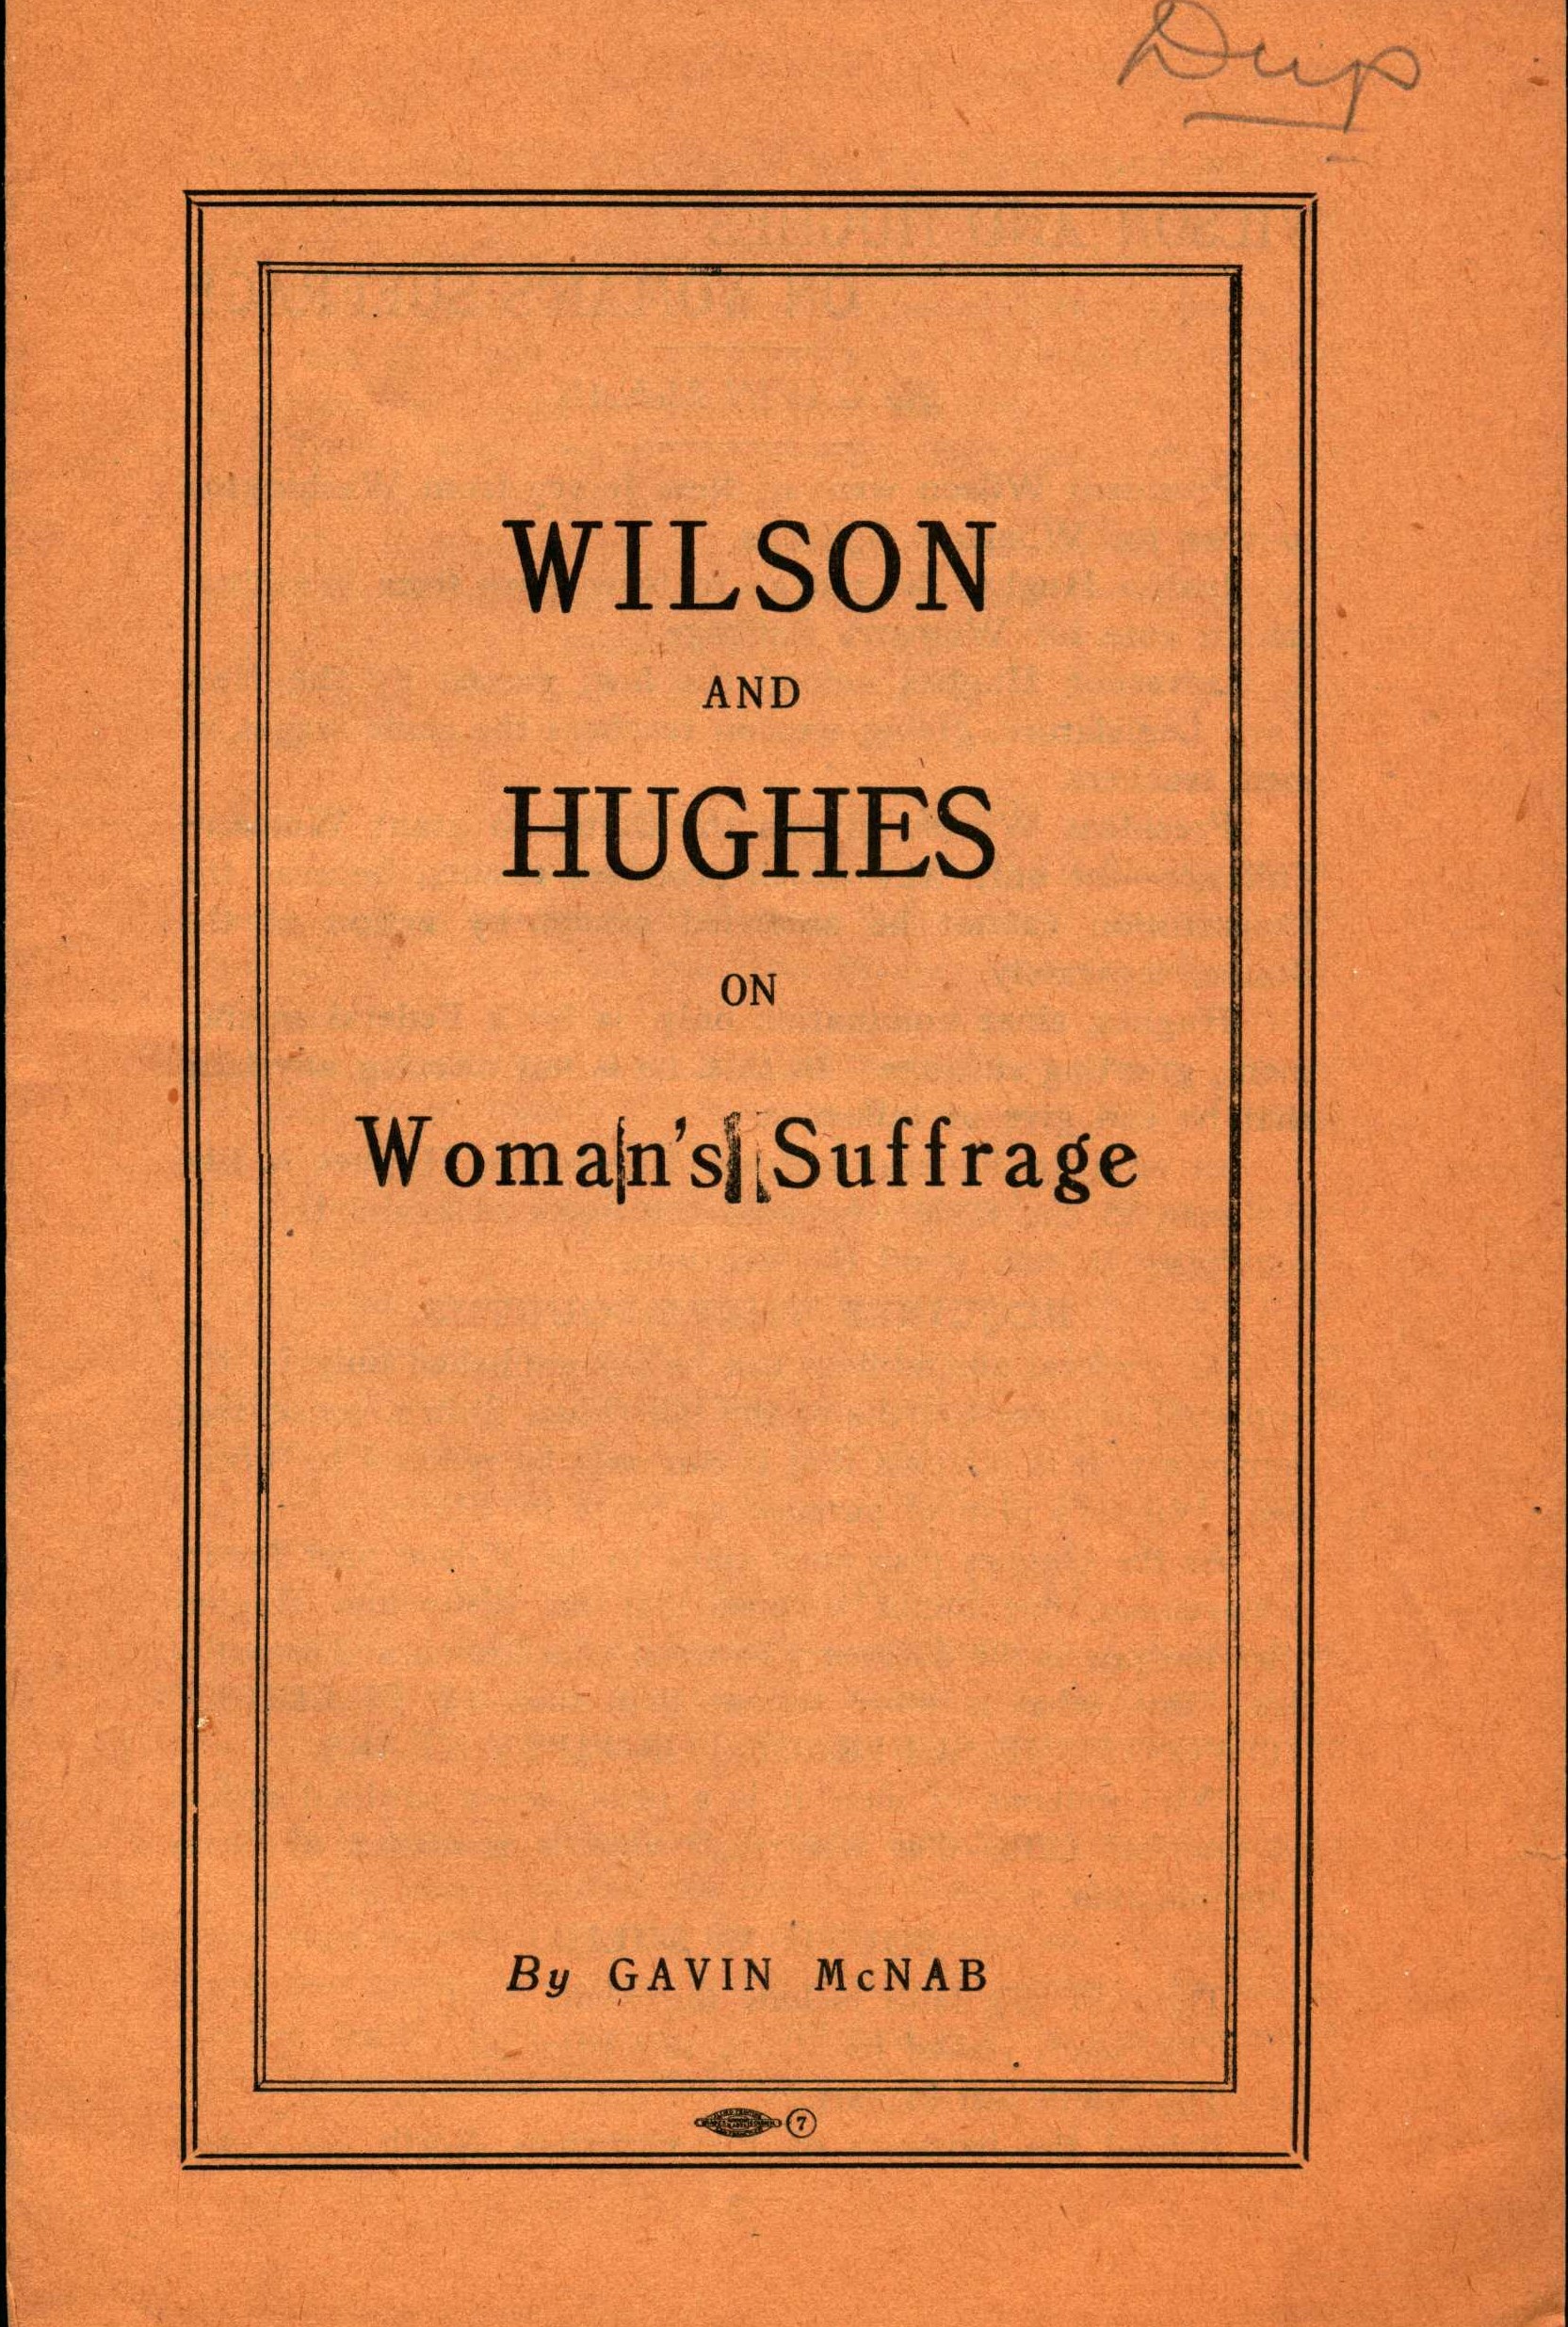 Front cover shows title and author information